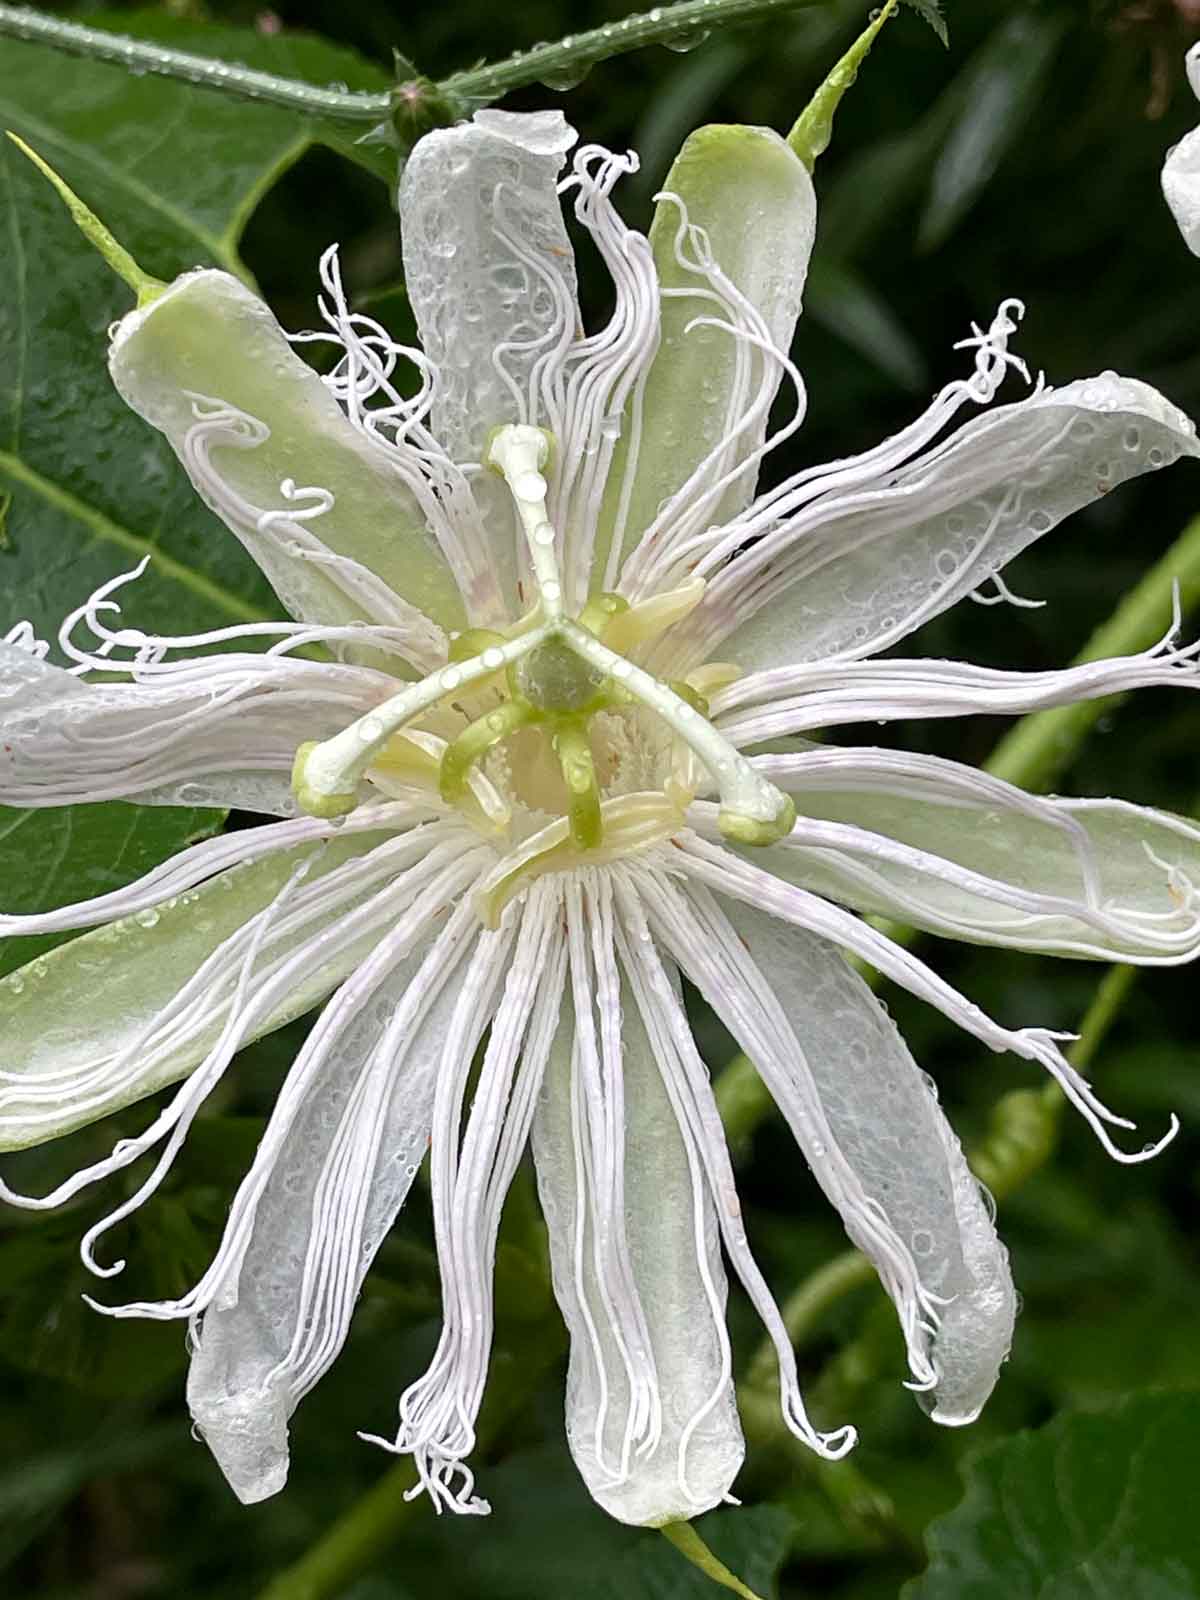 The blossom of a white passionflower.